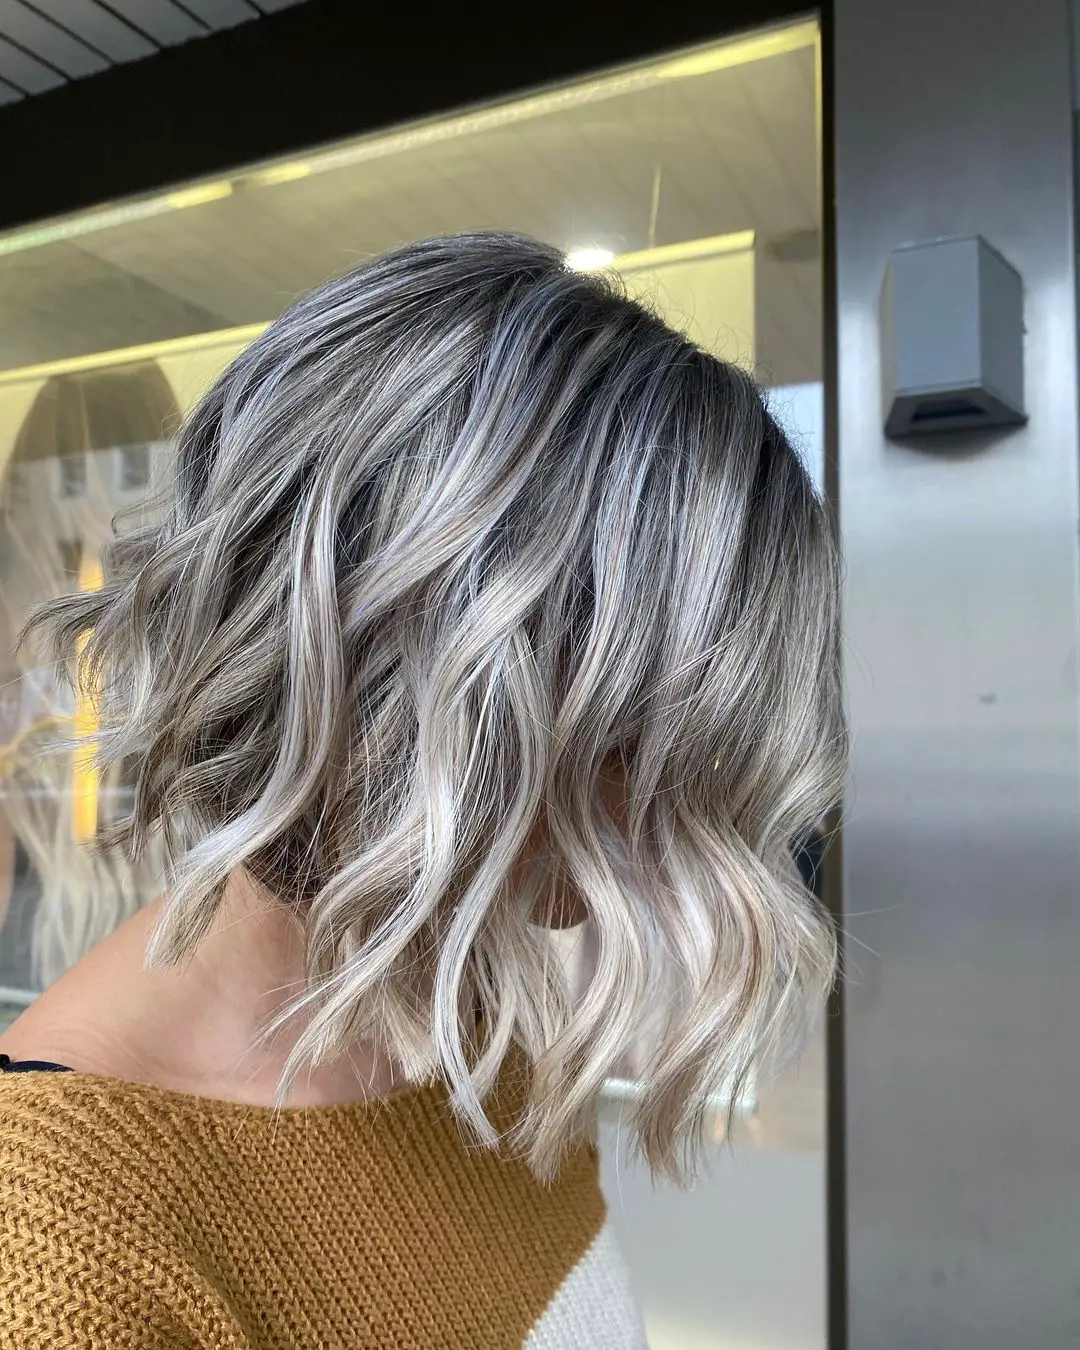 40-best-short-hairstyles-for-women-with-highlights Icy Blonde Bob